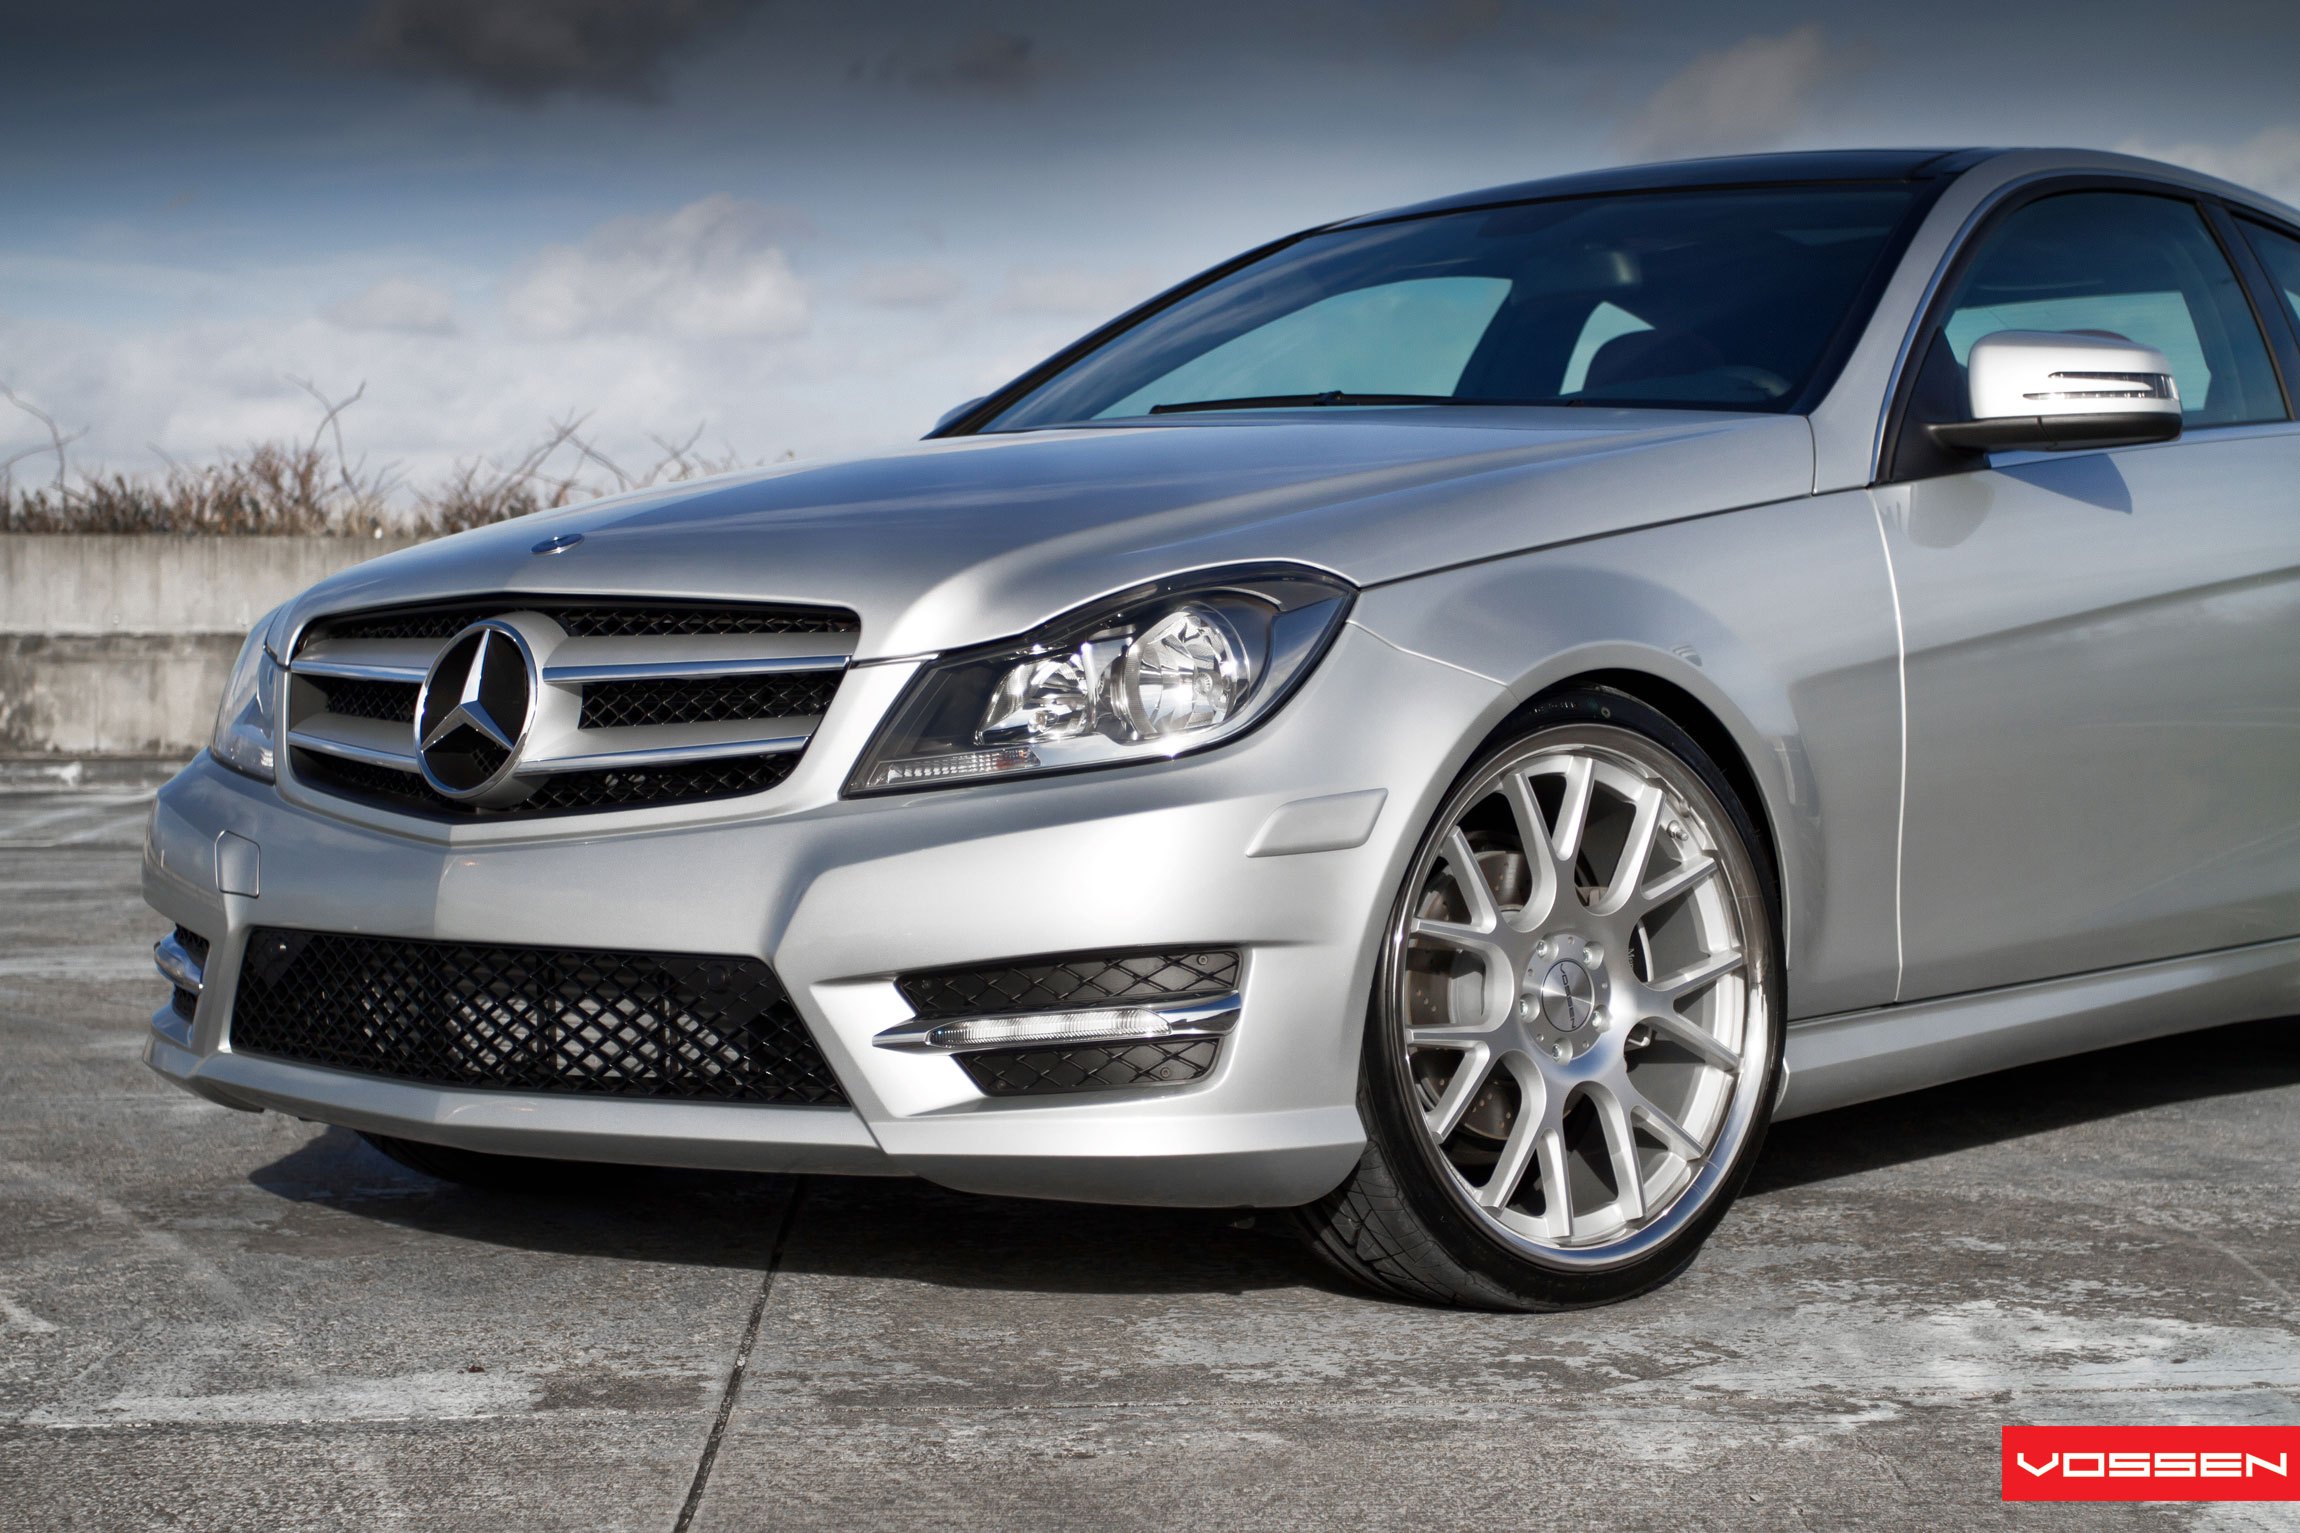 Aftermarket Front Bumper on Silver Mercedes C Class - Photo by Vossen